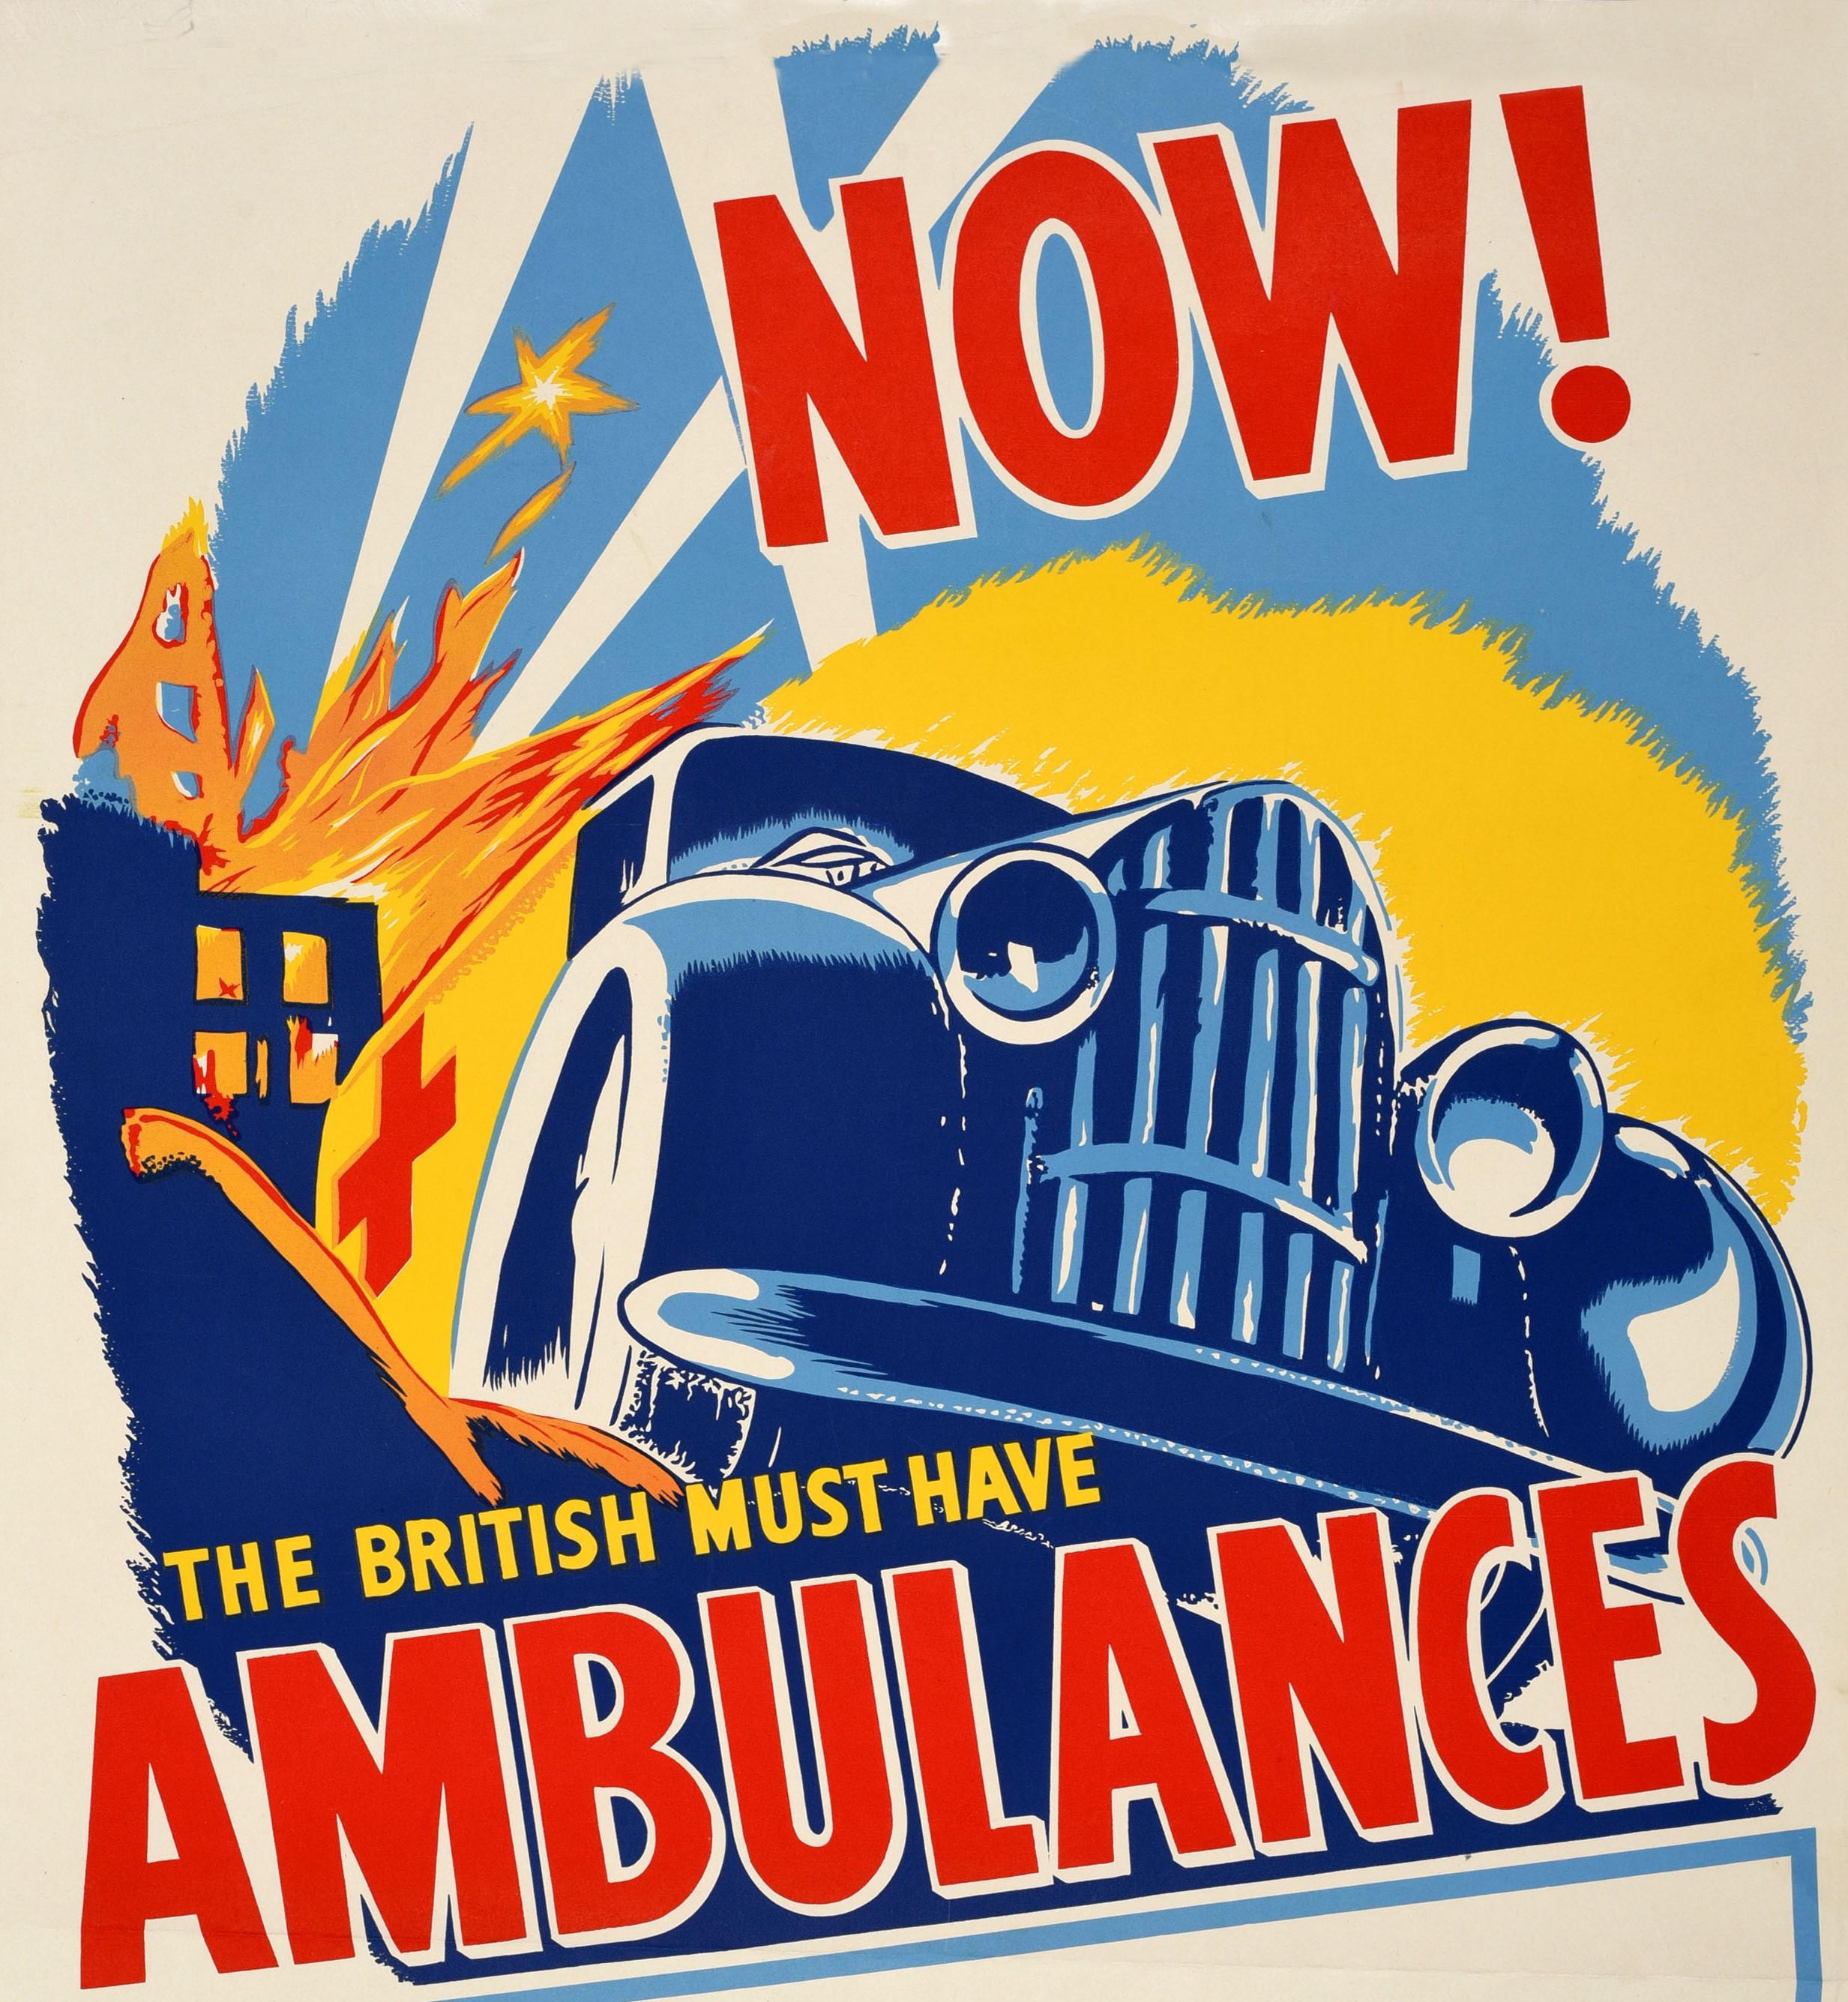 Original vintage World War Two propaganda poster - Now! The British Must Have Ambulances - featuring a bold colourful design depicting an ambulance with a Red Cross on the side in front of a building on fire with the flames rising up to the white